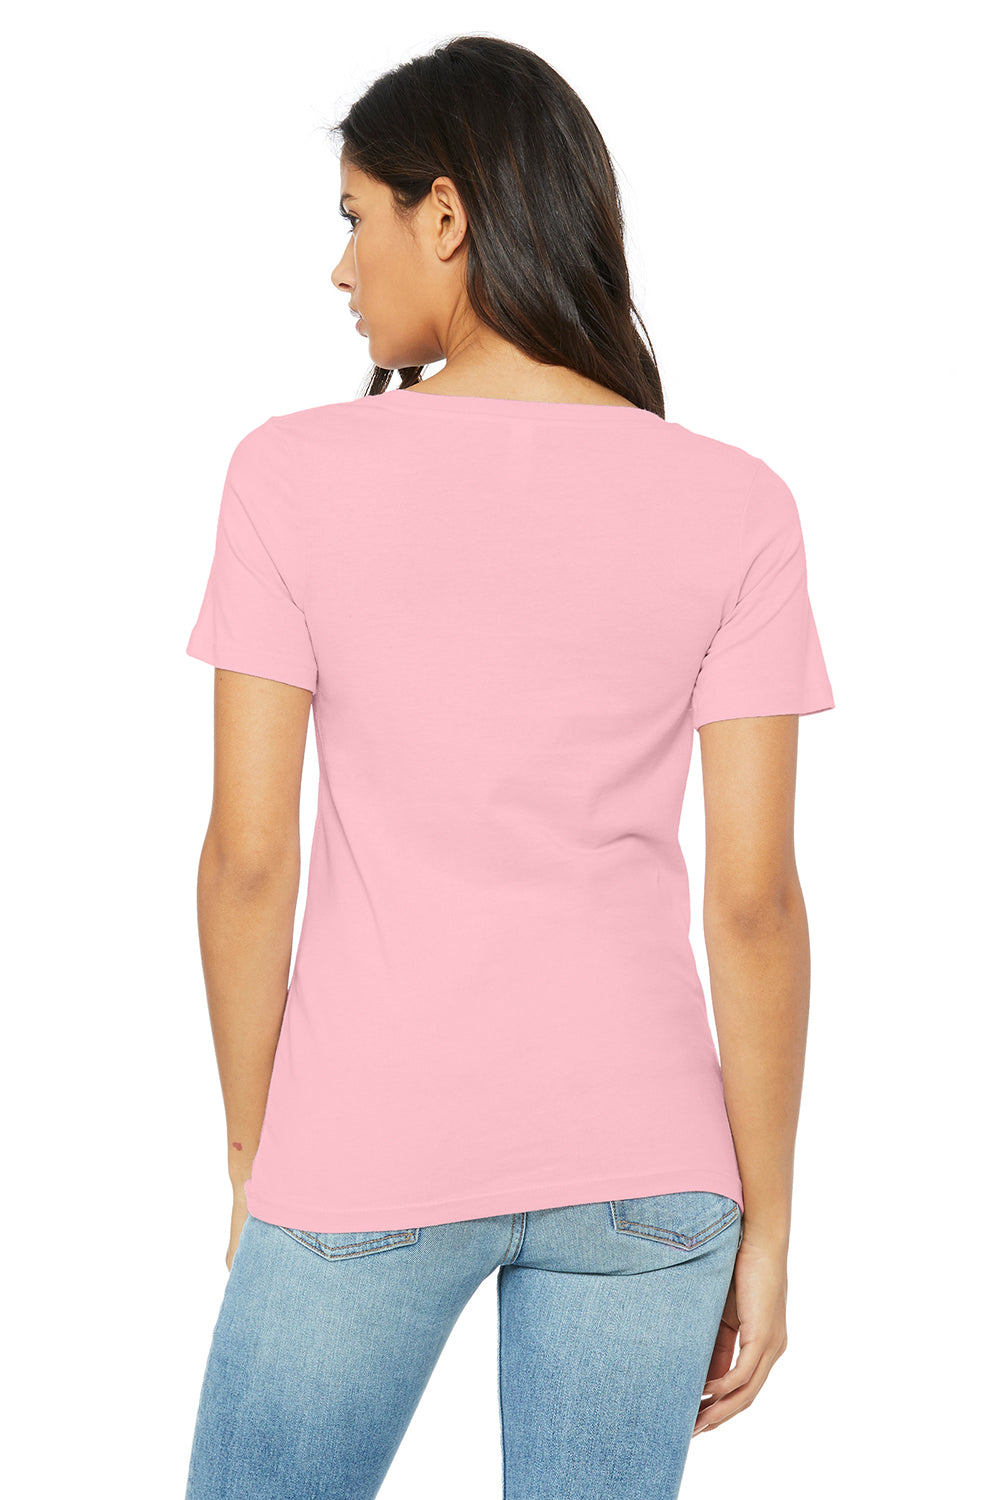 Bella + Canvas BC6405/6405 Womens Relaxed Jersey Short Sleeve V-Neck T-Shirt Pink Model Back